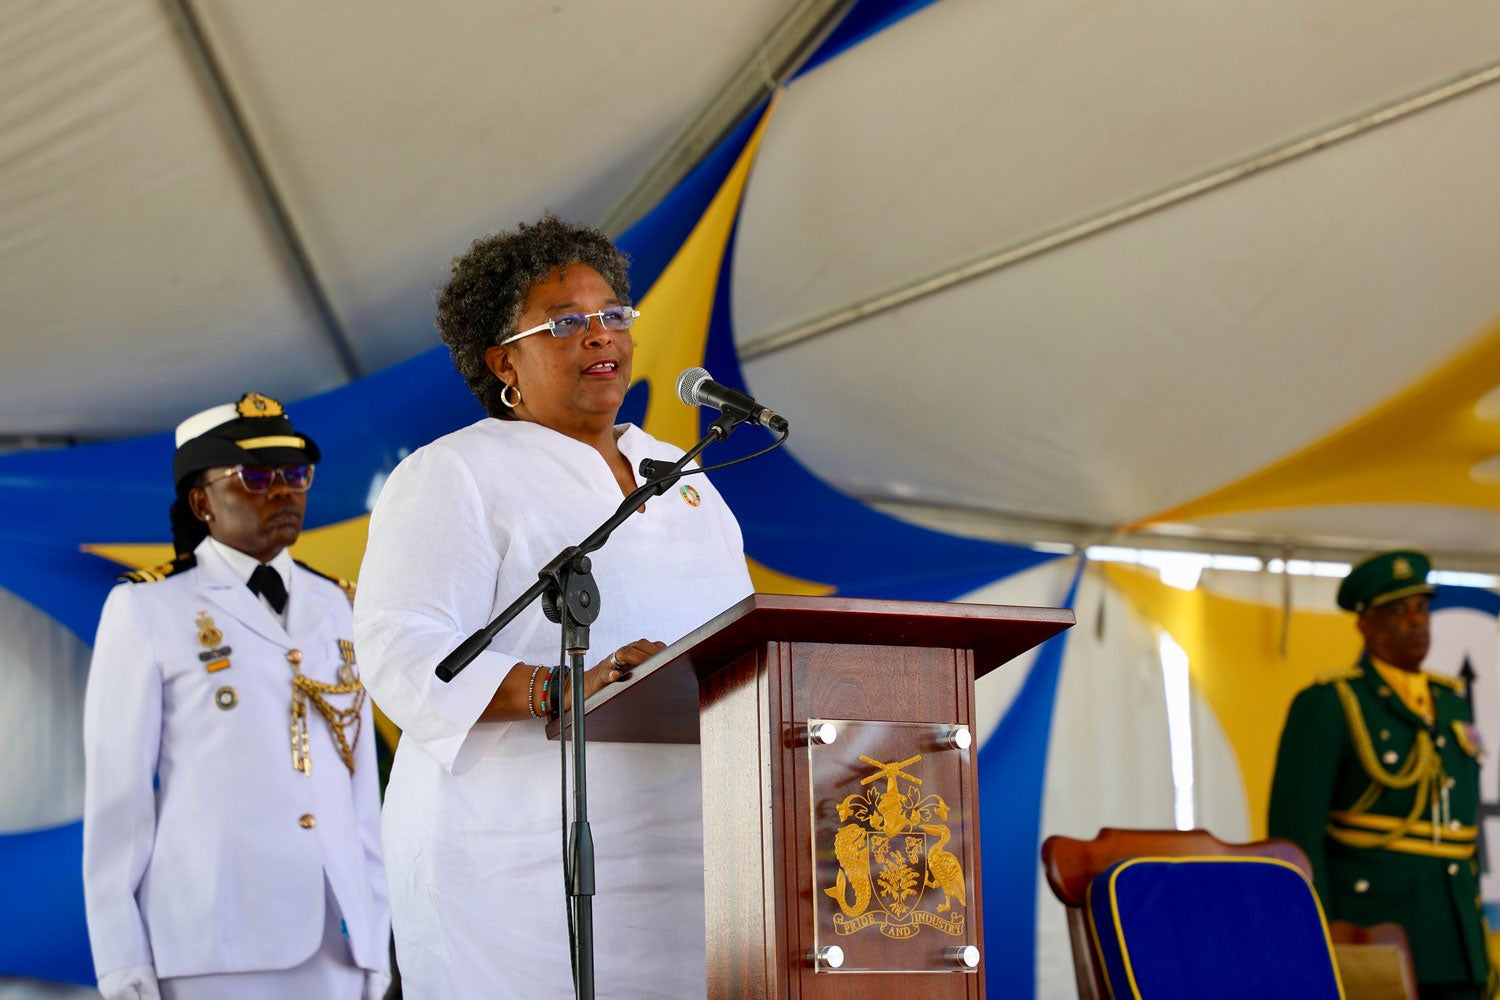 The Prime Minister of Barbados, the Honourable Mia Amor Mottley, thanking all award recipients for their service during the COVID-19 pandemic.